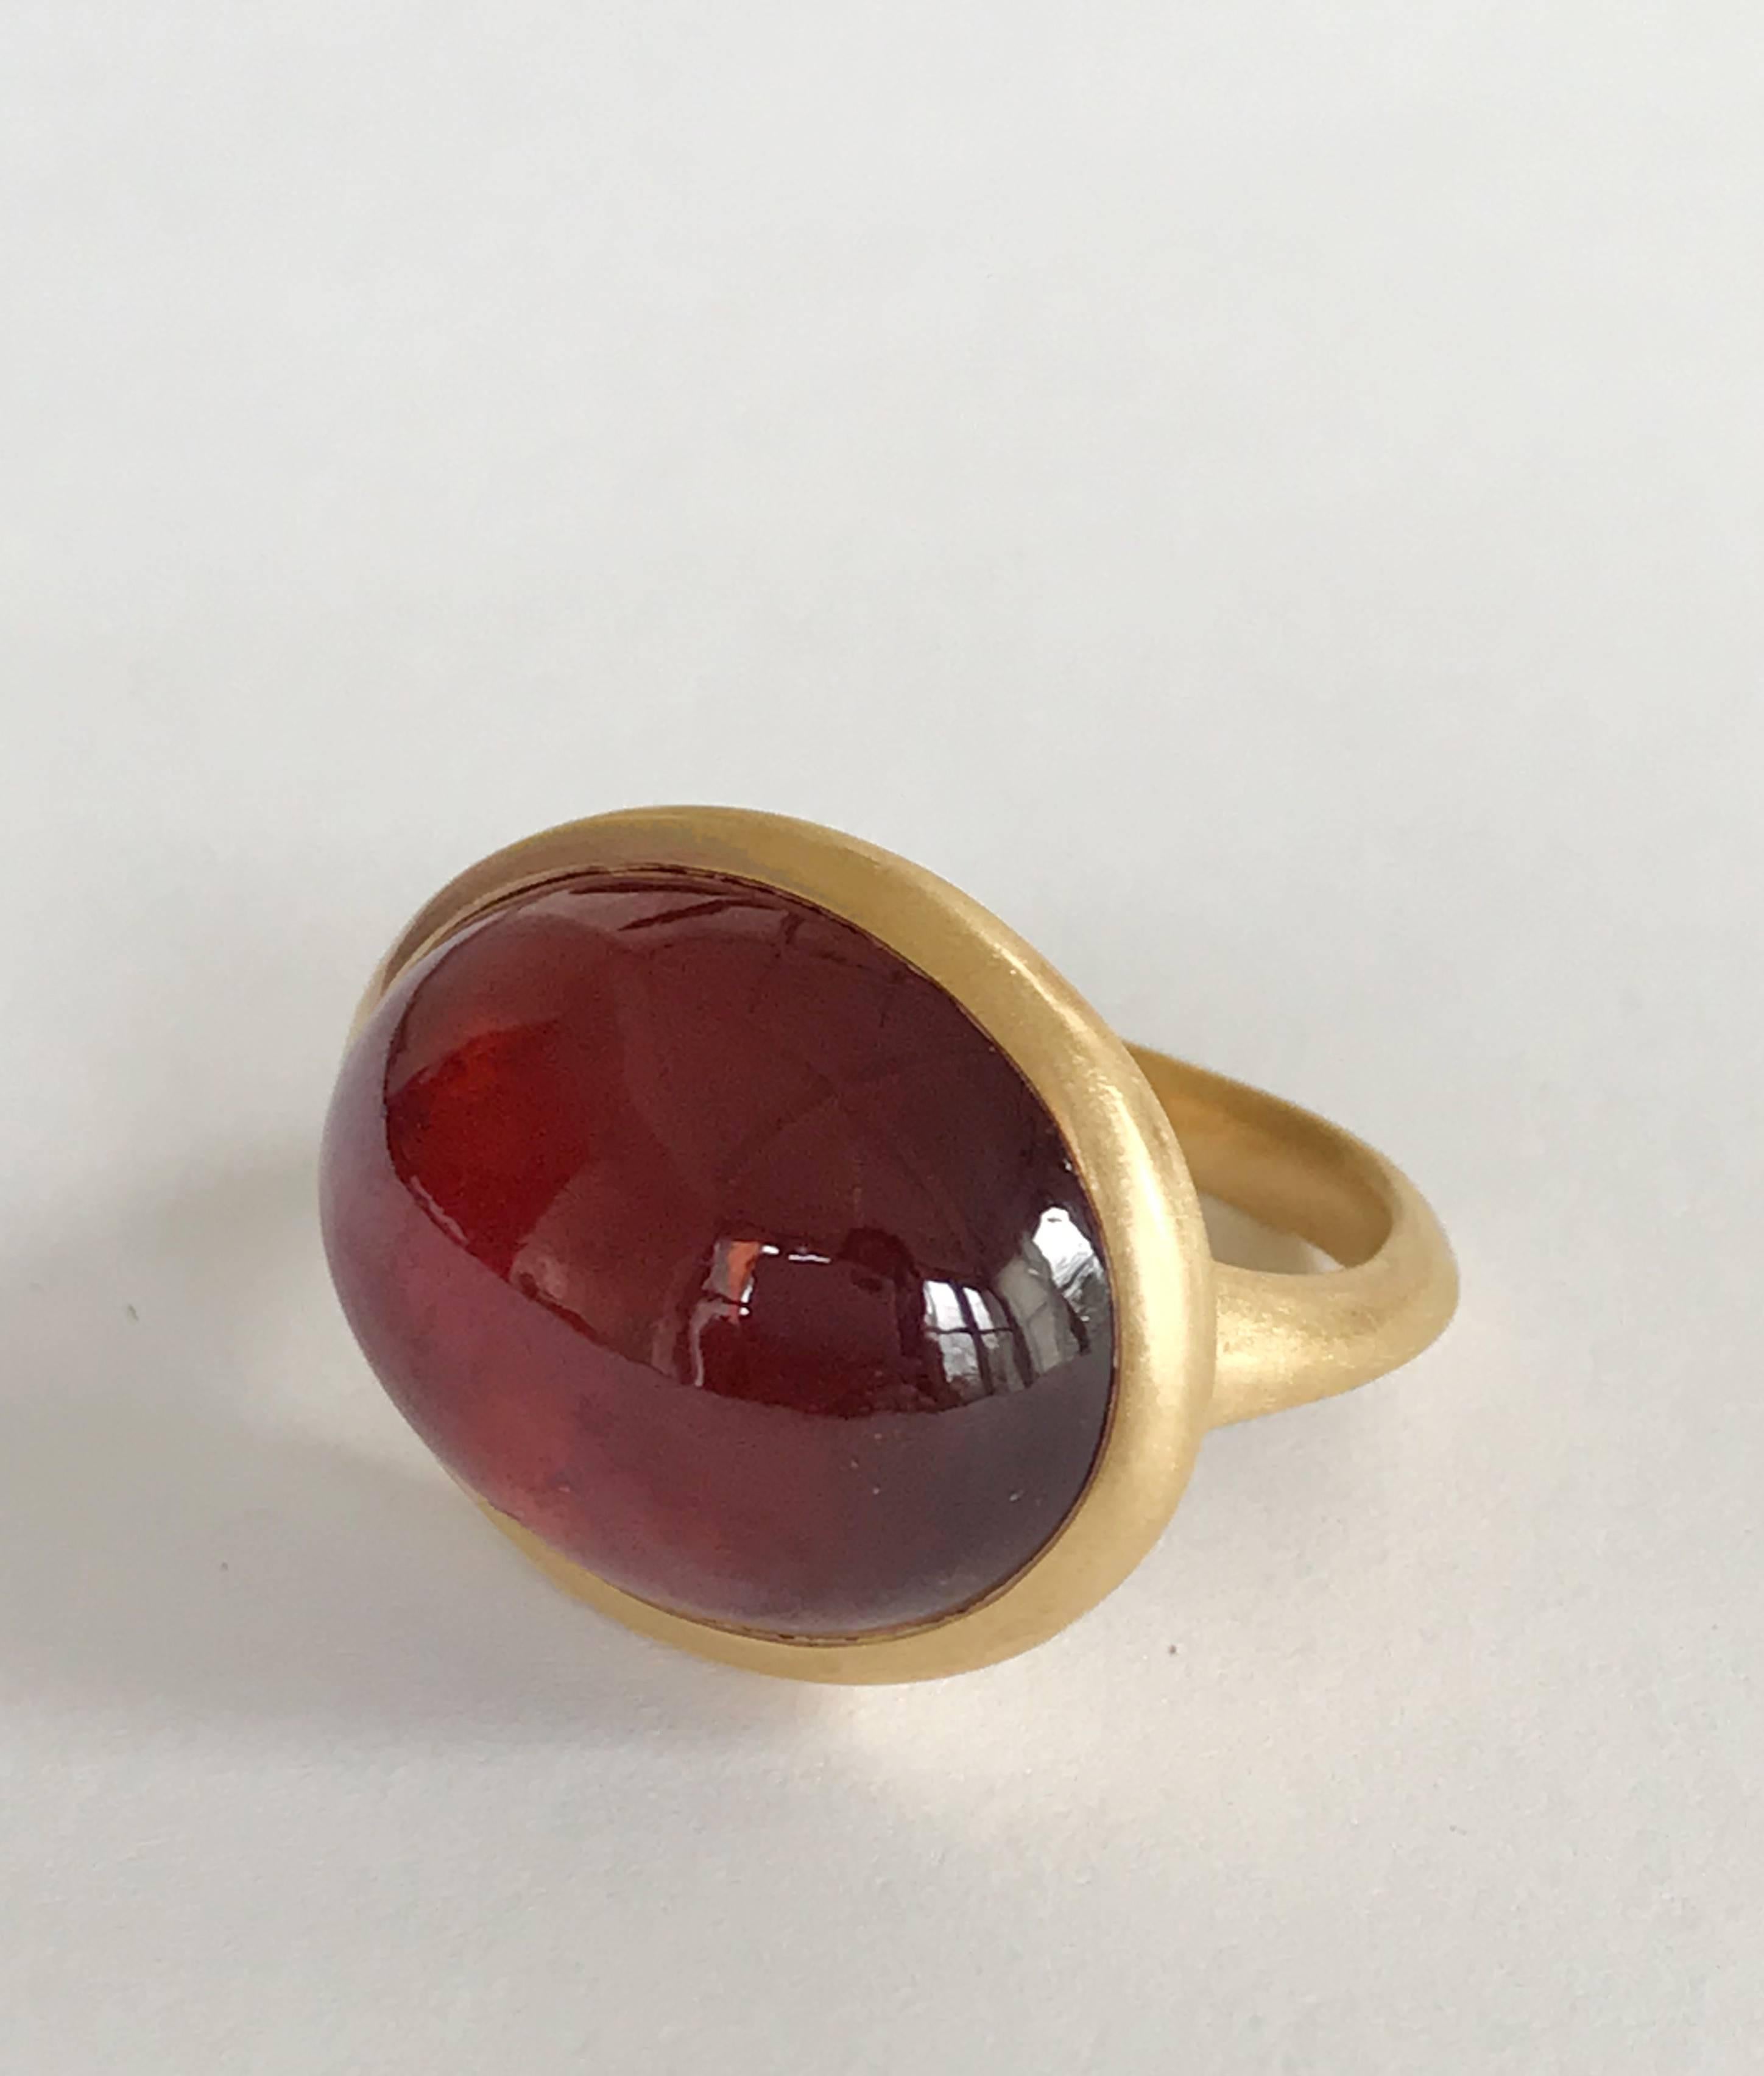 Dalben design 18k yellow gold matte finishing ring with a deep reed 24 carat bezel-set oval cabochon cut Hessonite Garnet. 
Ring size US 7 1/4 - EU 55 re-sizable to most finger sizes. 
Bezel stone dimensions : width 22,8 mm height 18,4 mm 
The ring